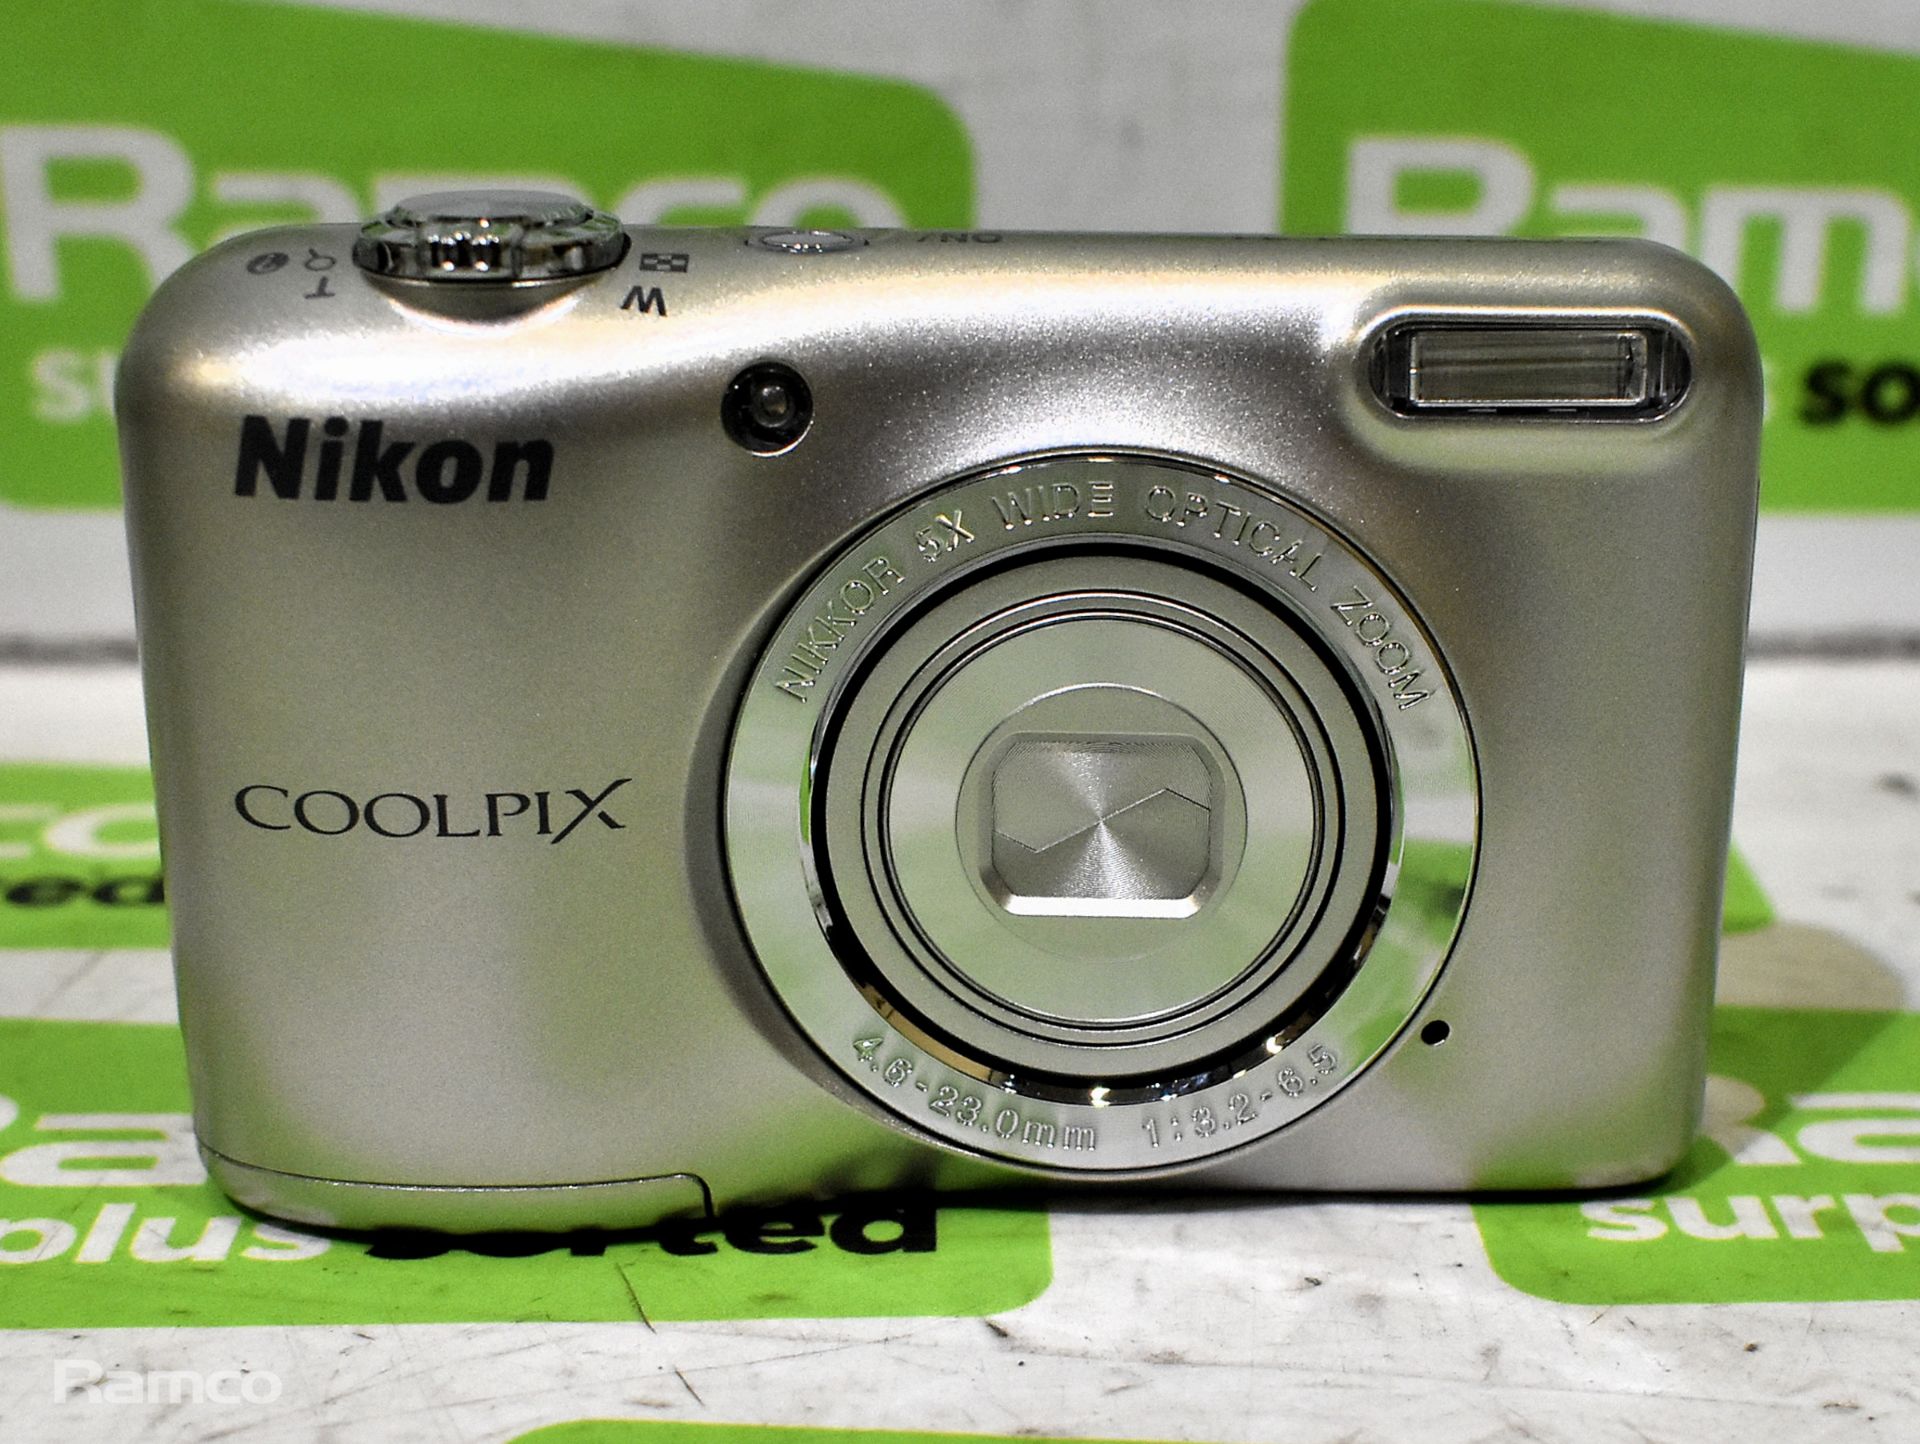 Nikon CoolPix L31 camera - with original box and accessories - used - Image 2 of 4